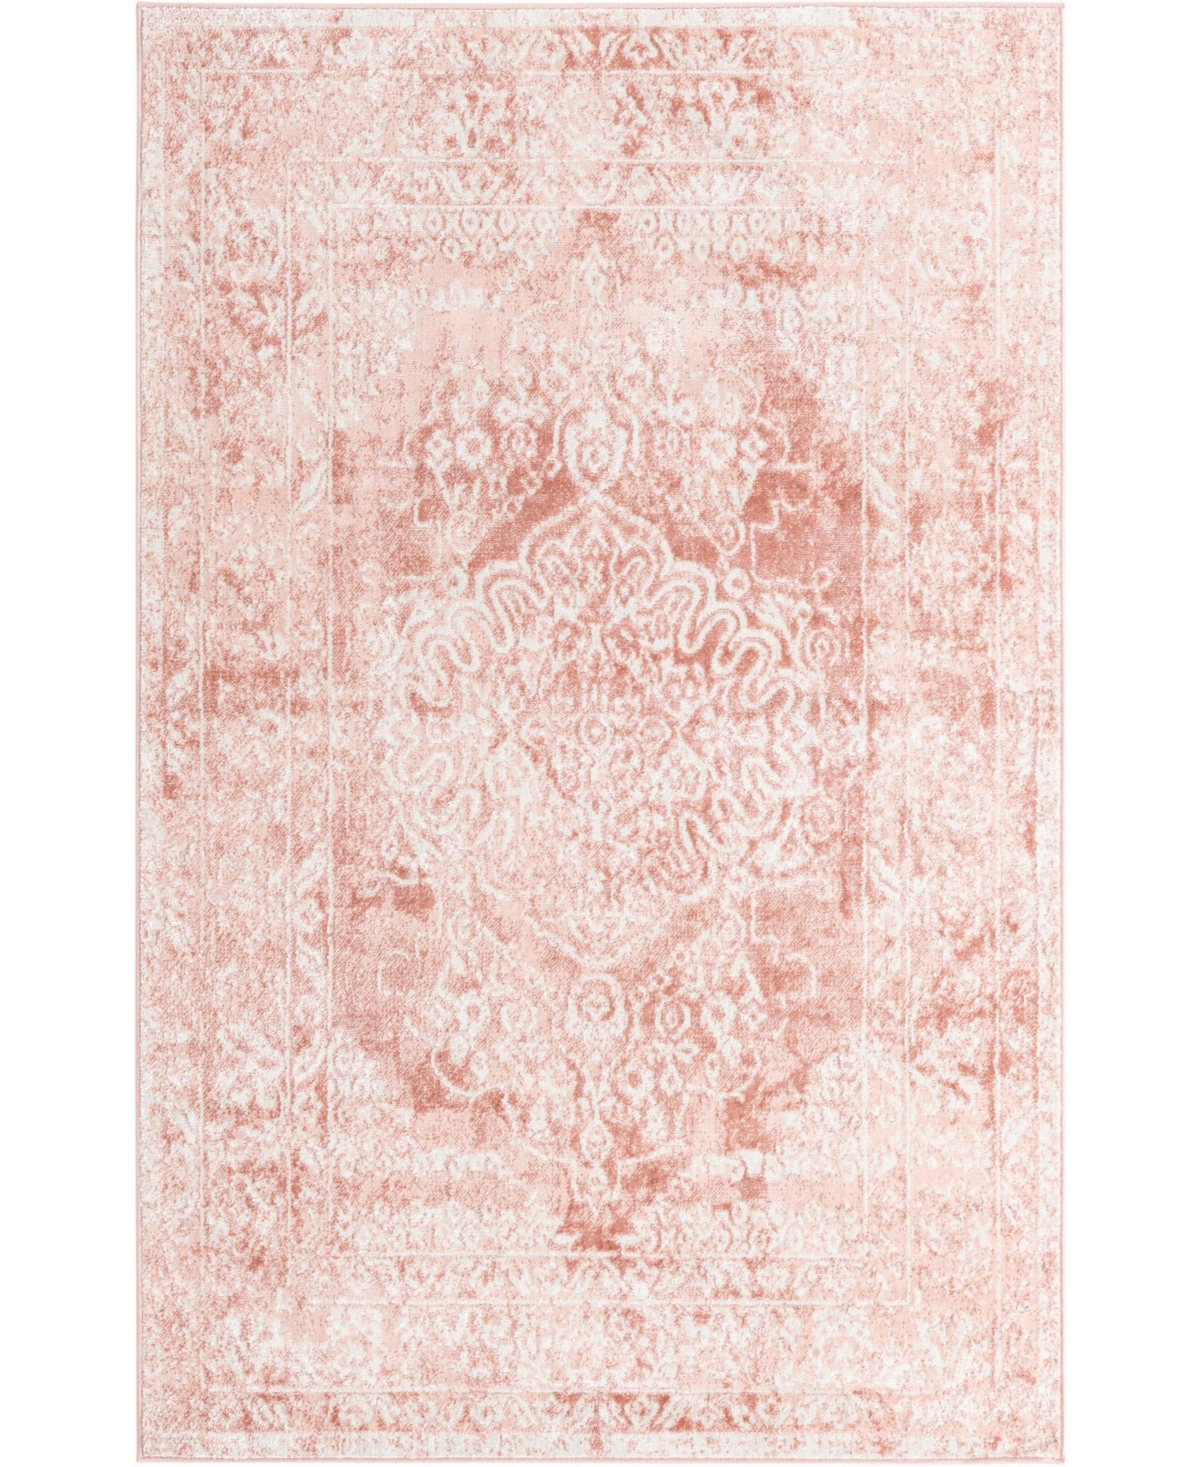 Bayshore Home Shire Bodleian 5' X 8' Area Rug In Pink